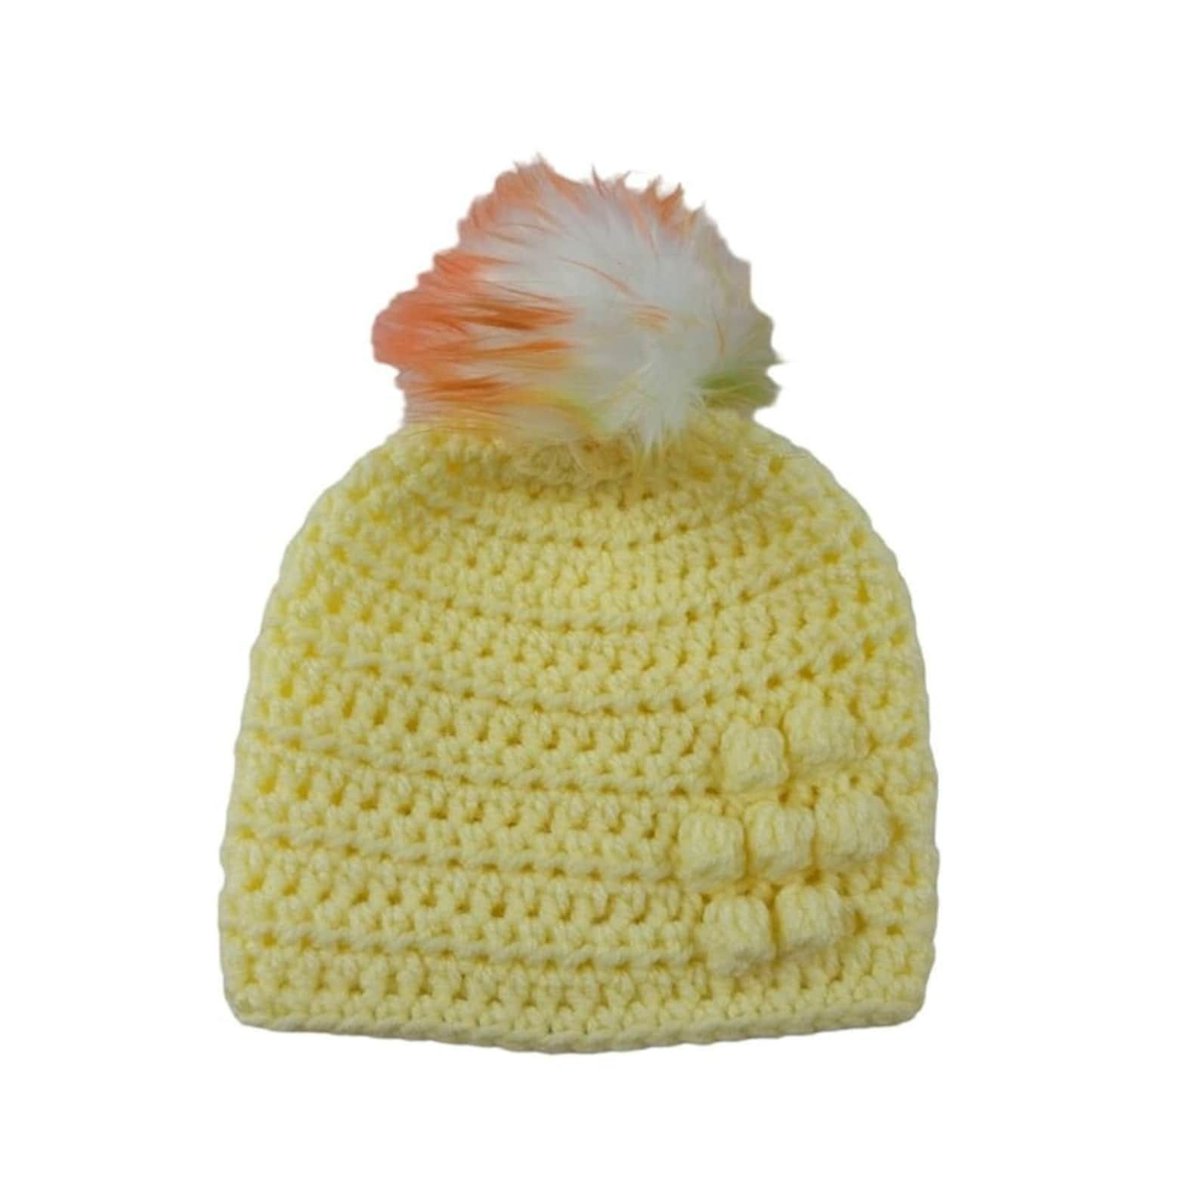 Keep your baby warm and stylish with this lemon crocheted hat! Detachable white faux fur pom adds a fun and playful touch. Available now at #knittingtopia. Don't miss out! knittingtopia.etsy.com/listing/168536… #babyhat #etsy #craftbizparty #MHHSBD #uksmallbiz #atsocialmedia #tweetuk